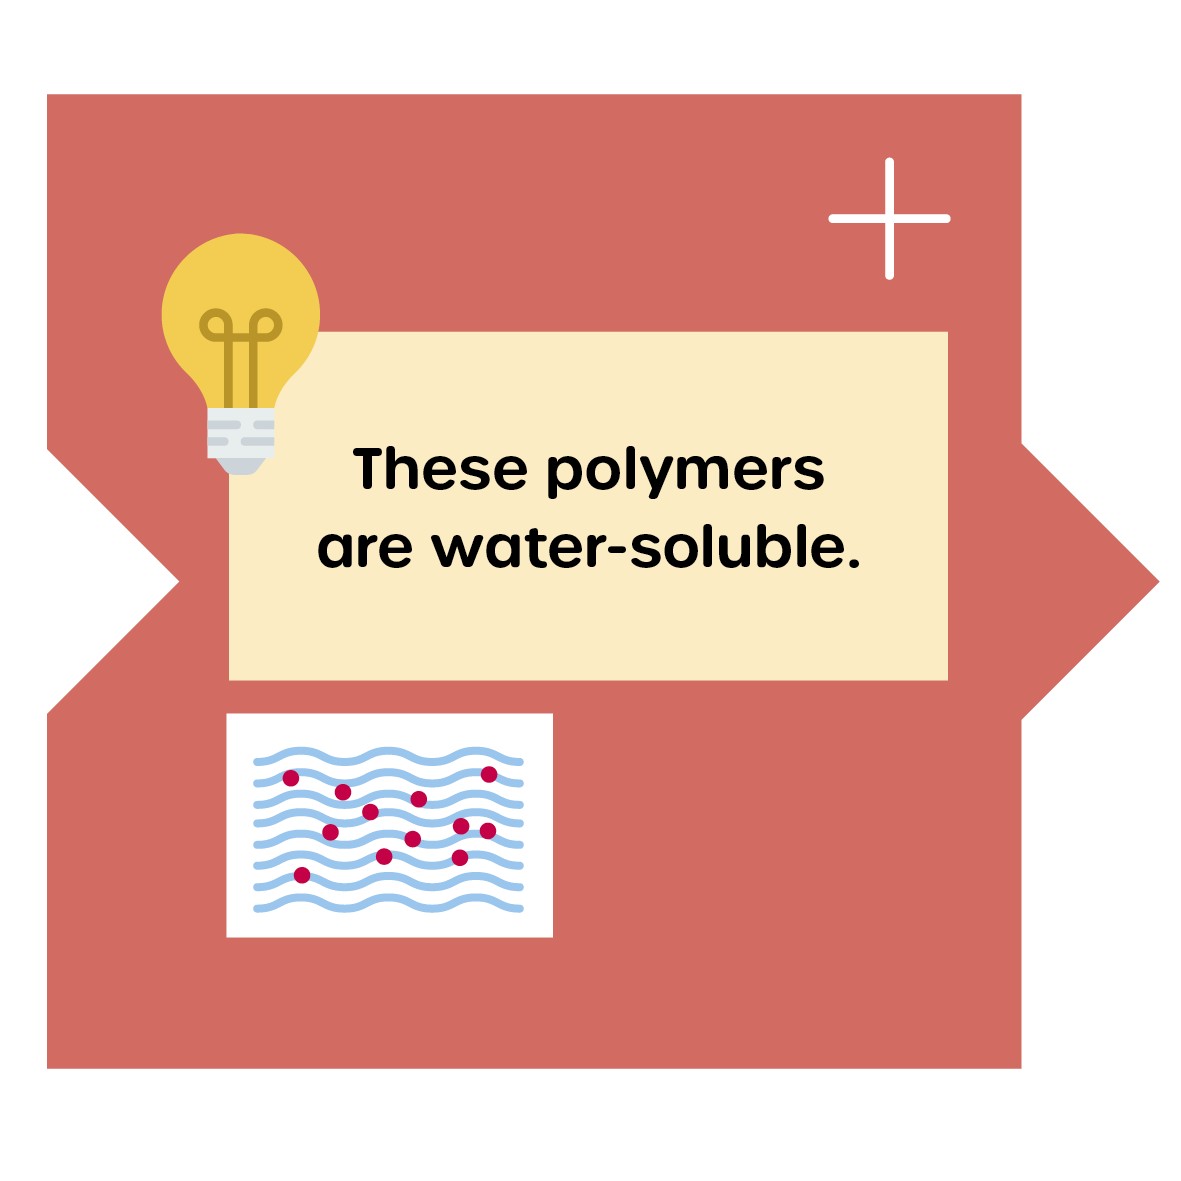 These polymers are water-soluble.